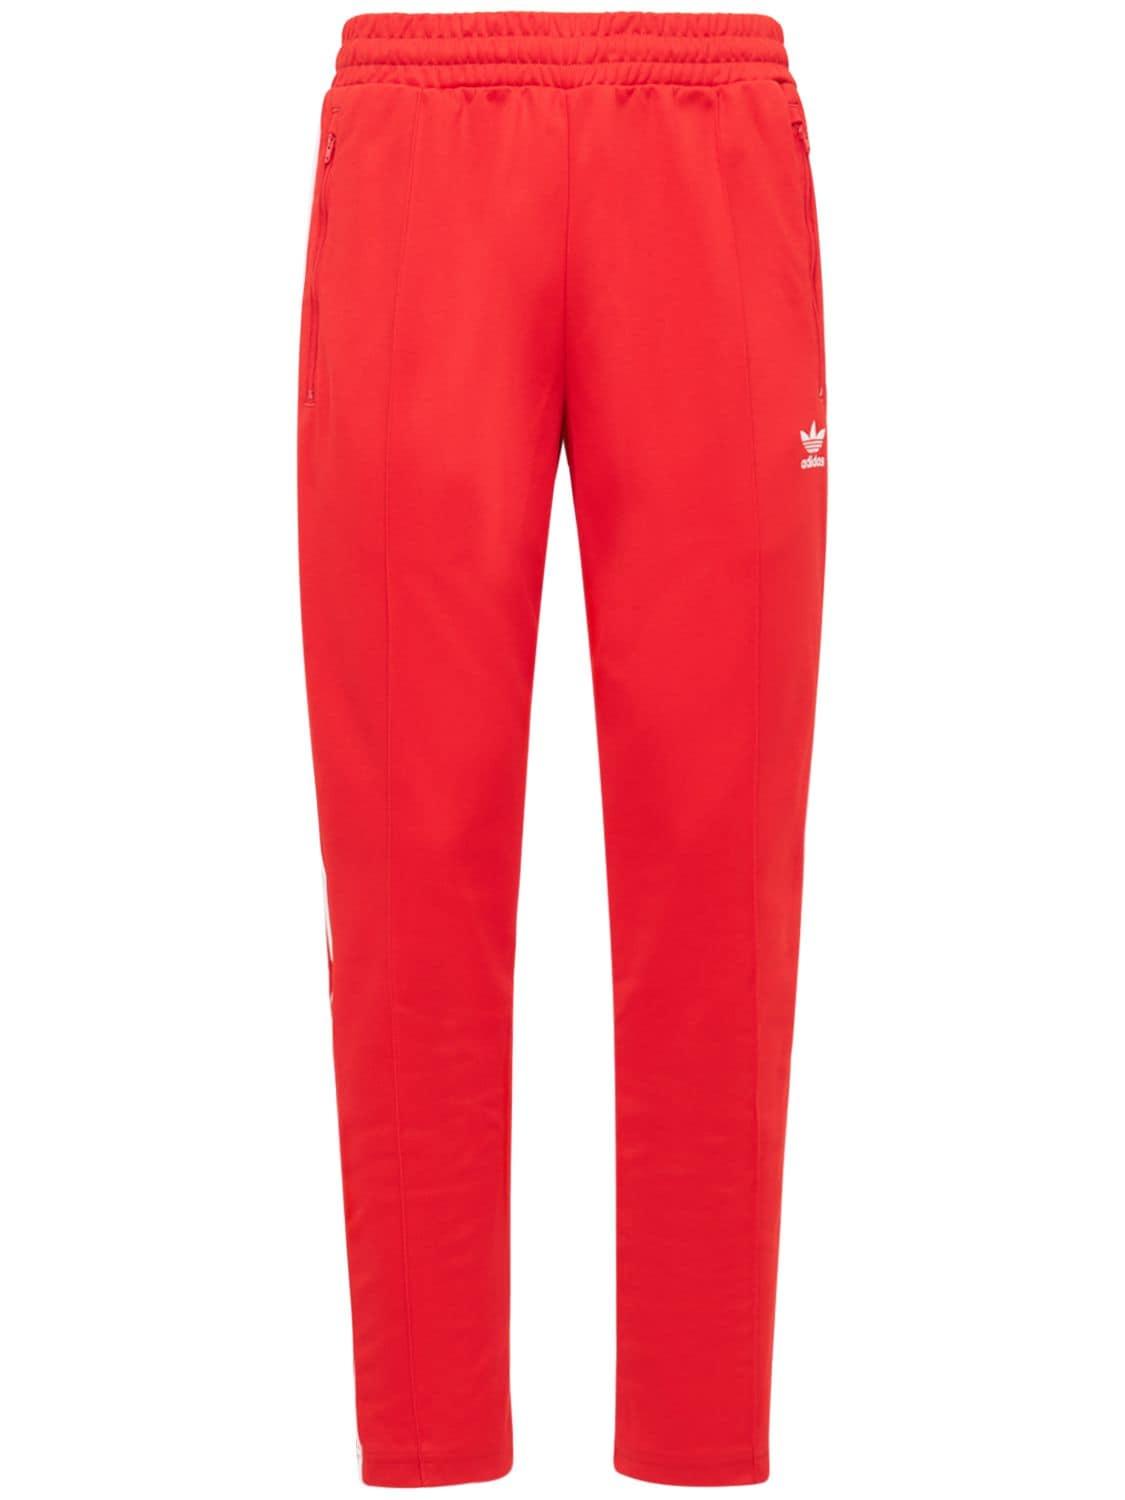 adidas Originals Beckenbauer Primeblue Track Pants in Red/White (Red) for  Men | Lyst